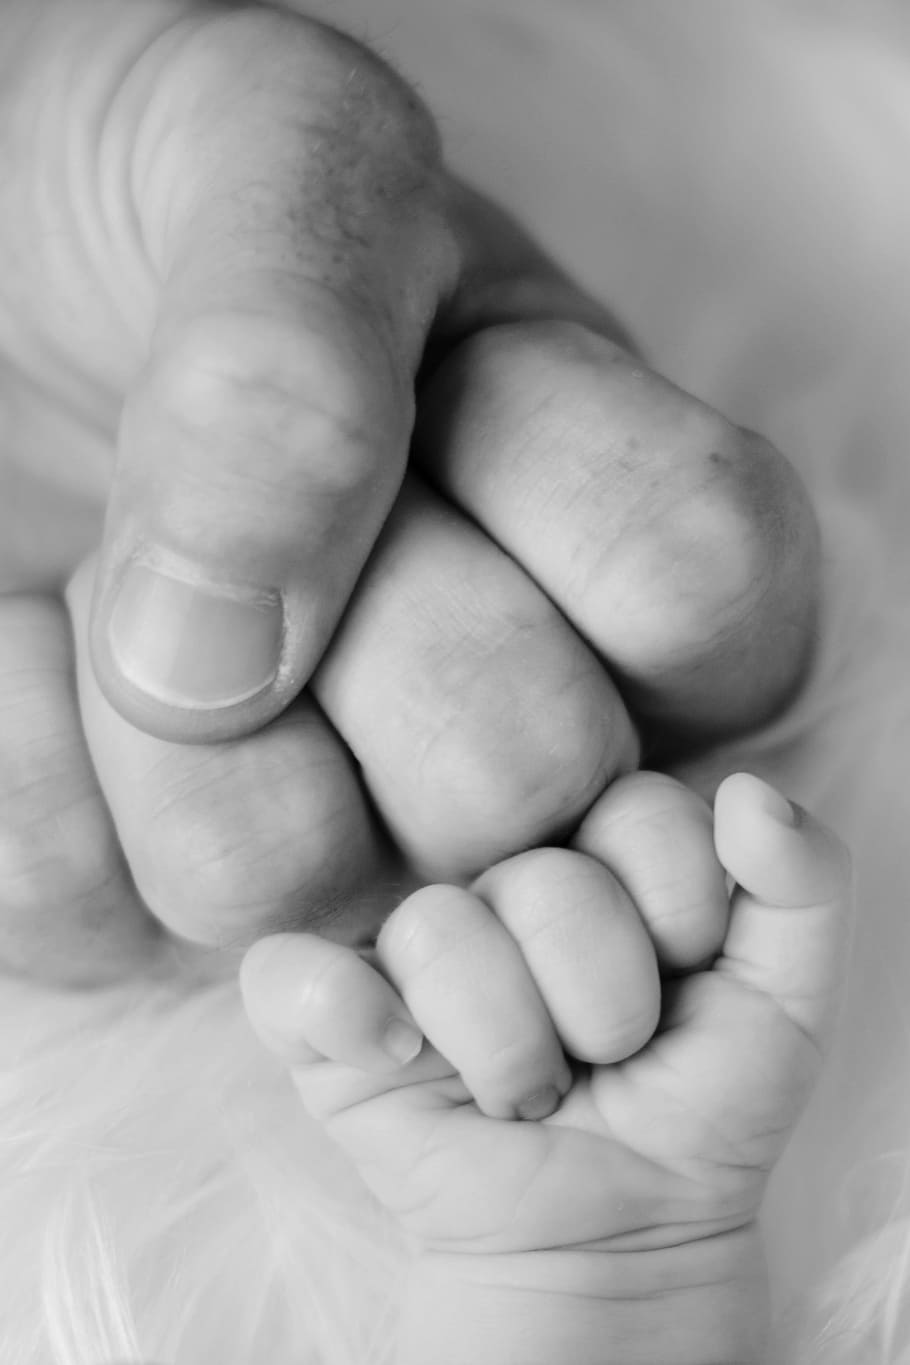 grayscale photo, two, human, hands, baby, father, son, hand, sweet, cute